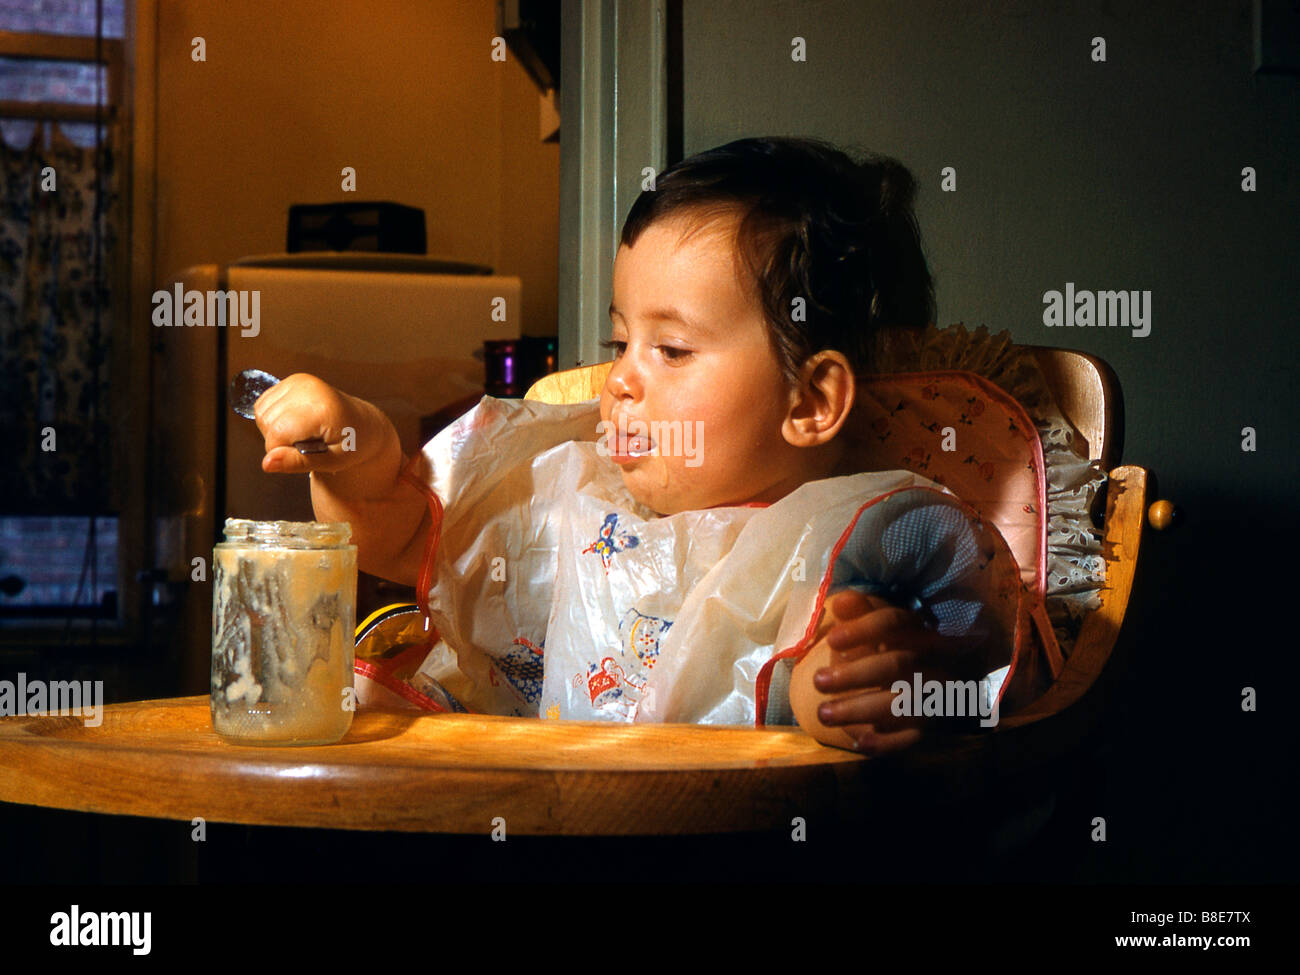 Baby in a high chair enjoying her food, USA, 1955 Stock Photo